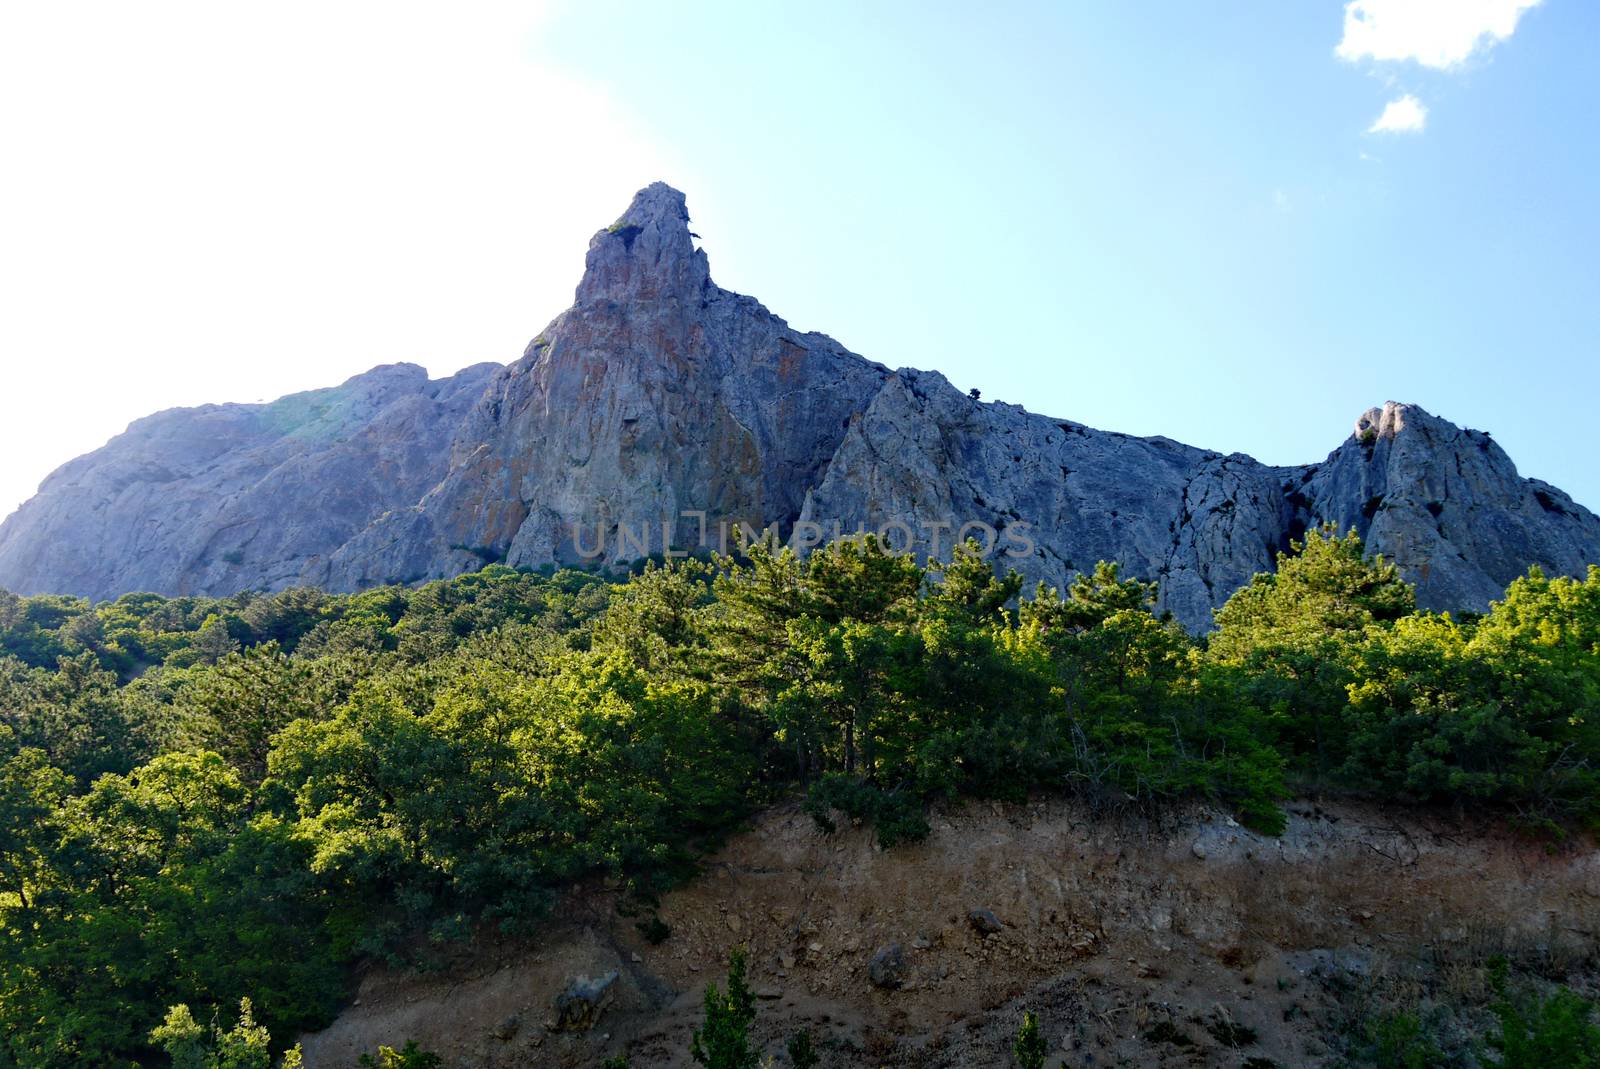 wide dense forest on the background of a steep gray rock under a blue sky